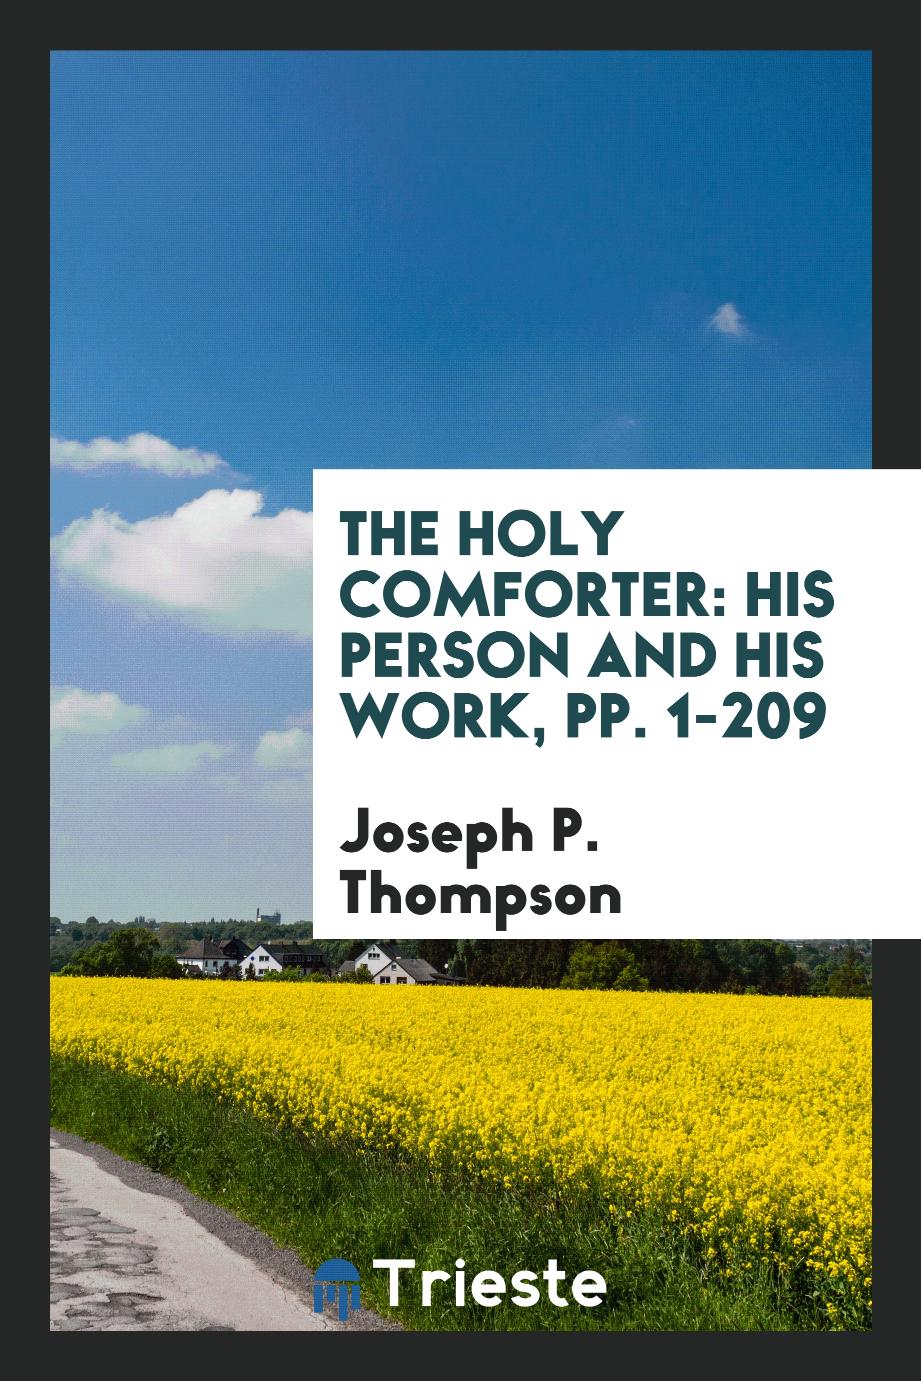 The Holy Comforter: His Person and His Work, pp. 1-209